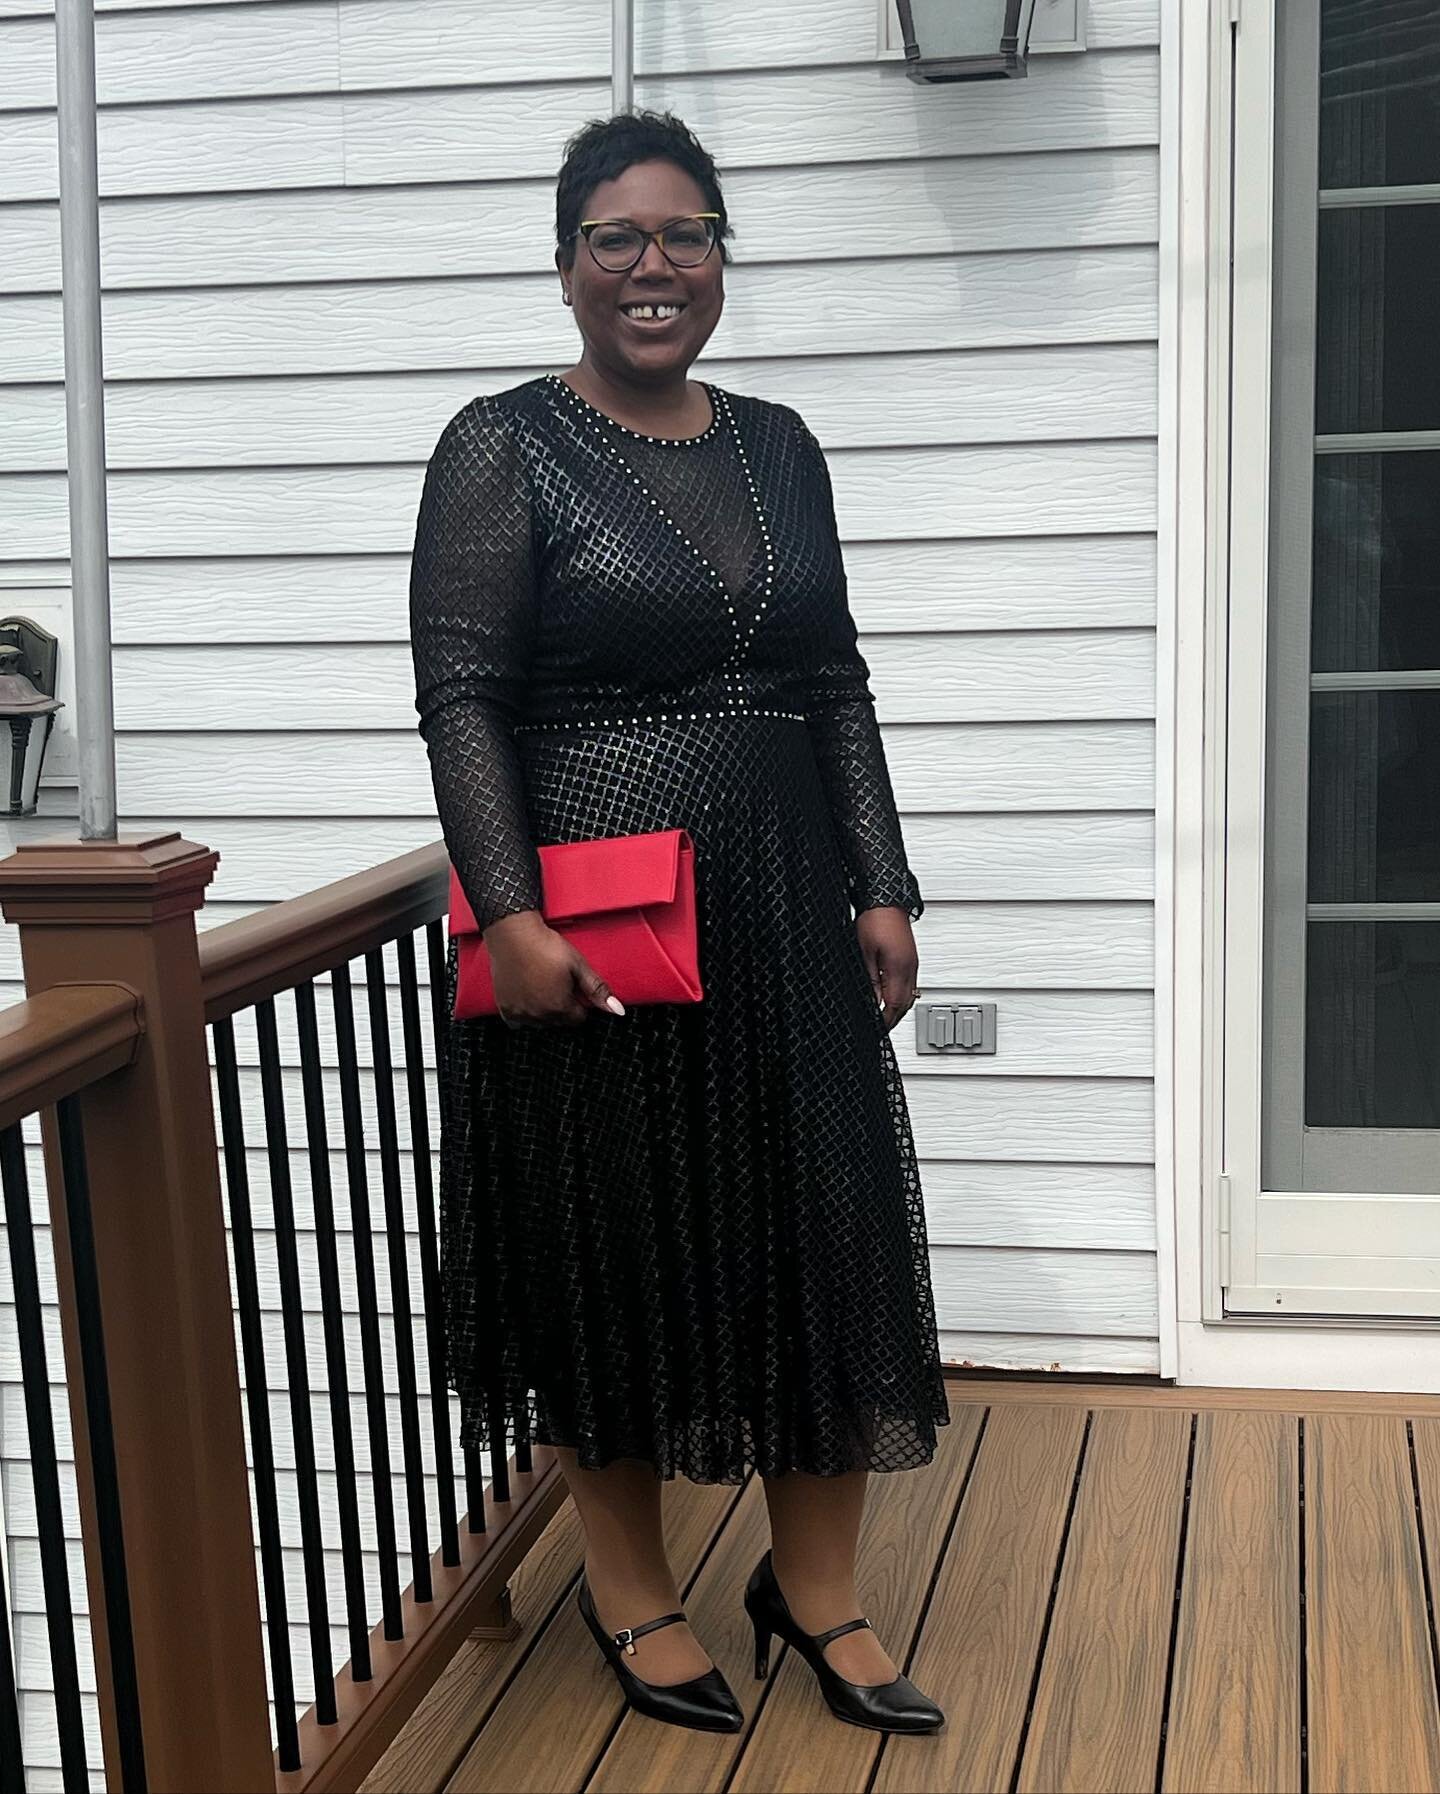 Presto Chango. From ministry in NY to a wedding in NJ. Today was a beauty-FULL day to hang with my beloved as we witnessed the nuptials of my good friend and her beloved. #reverenddonnao